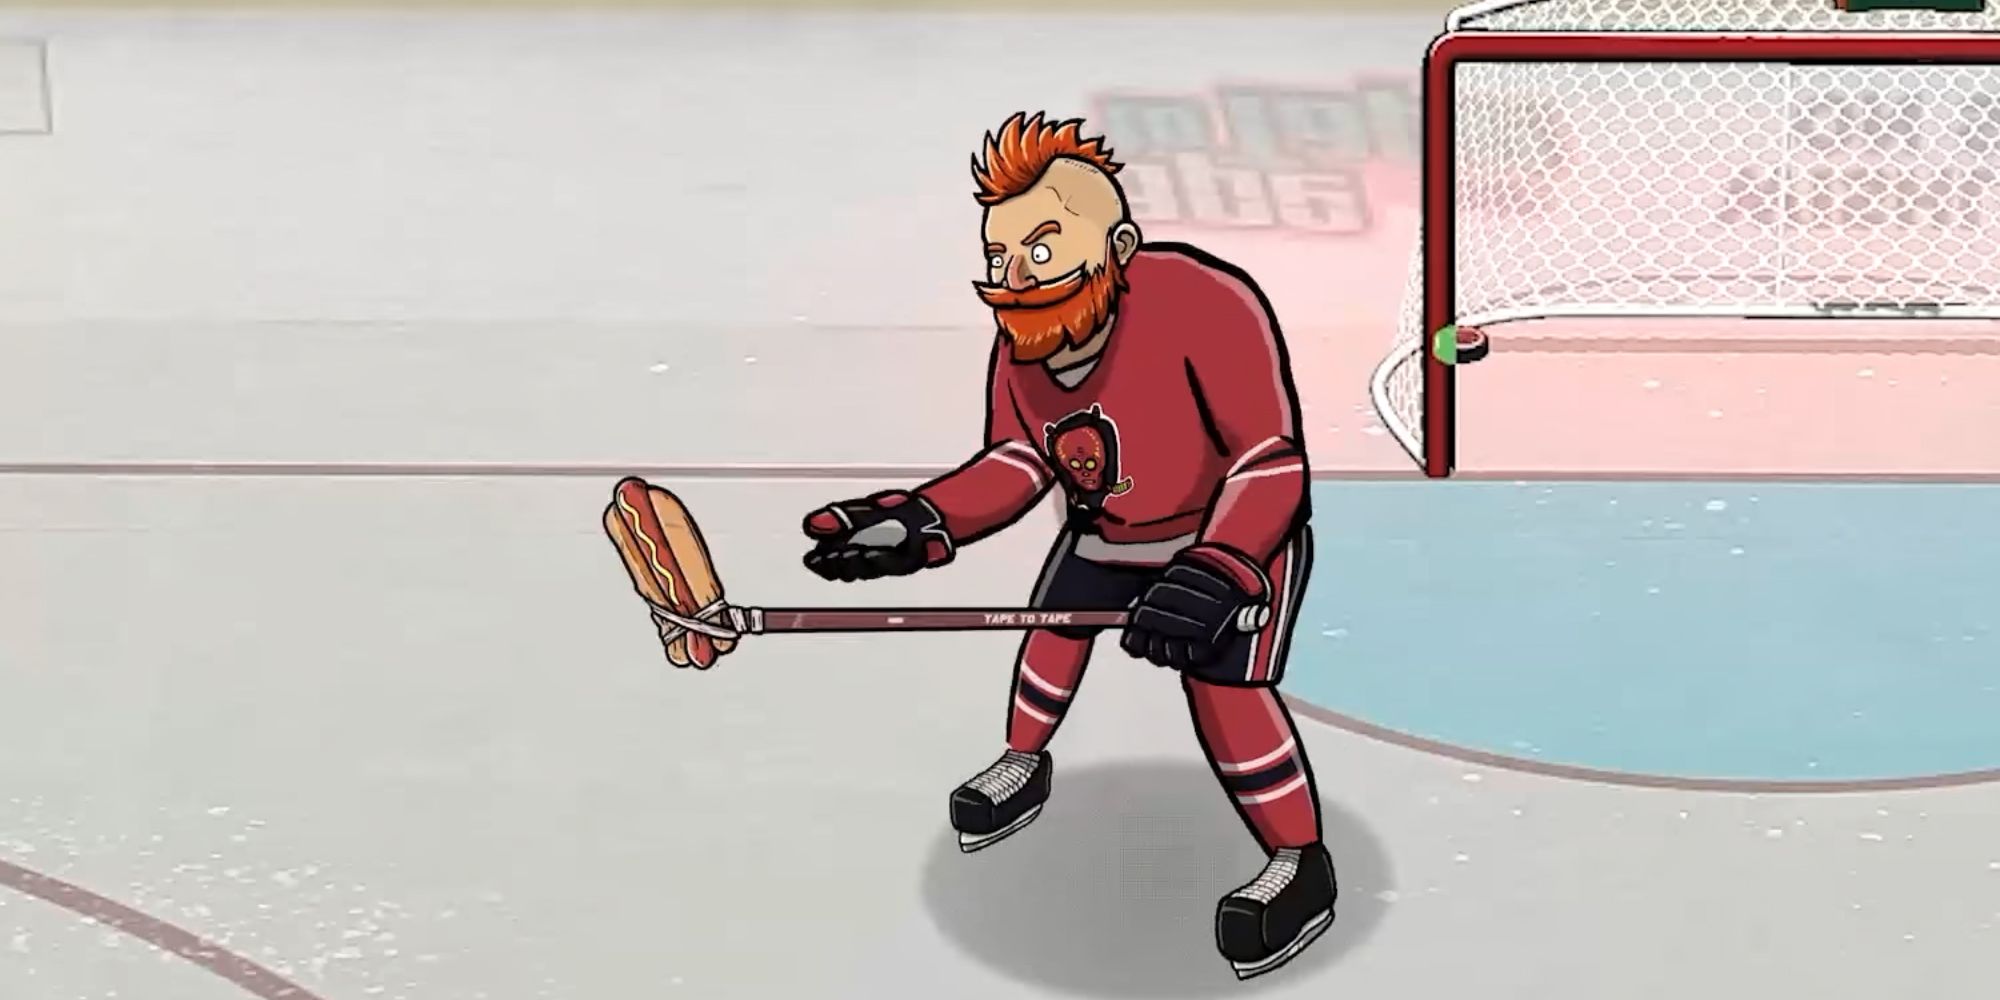 Tape-to-tape mascot Angus McShaggy holds a hot dog hockey stick